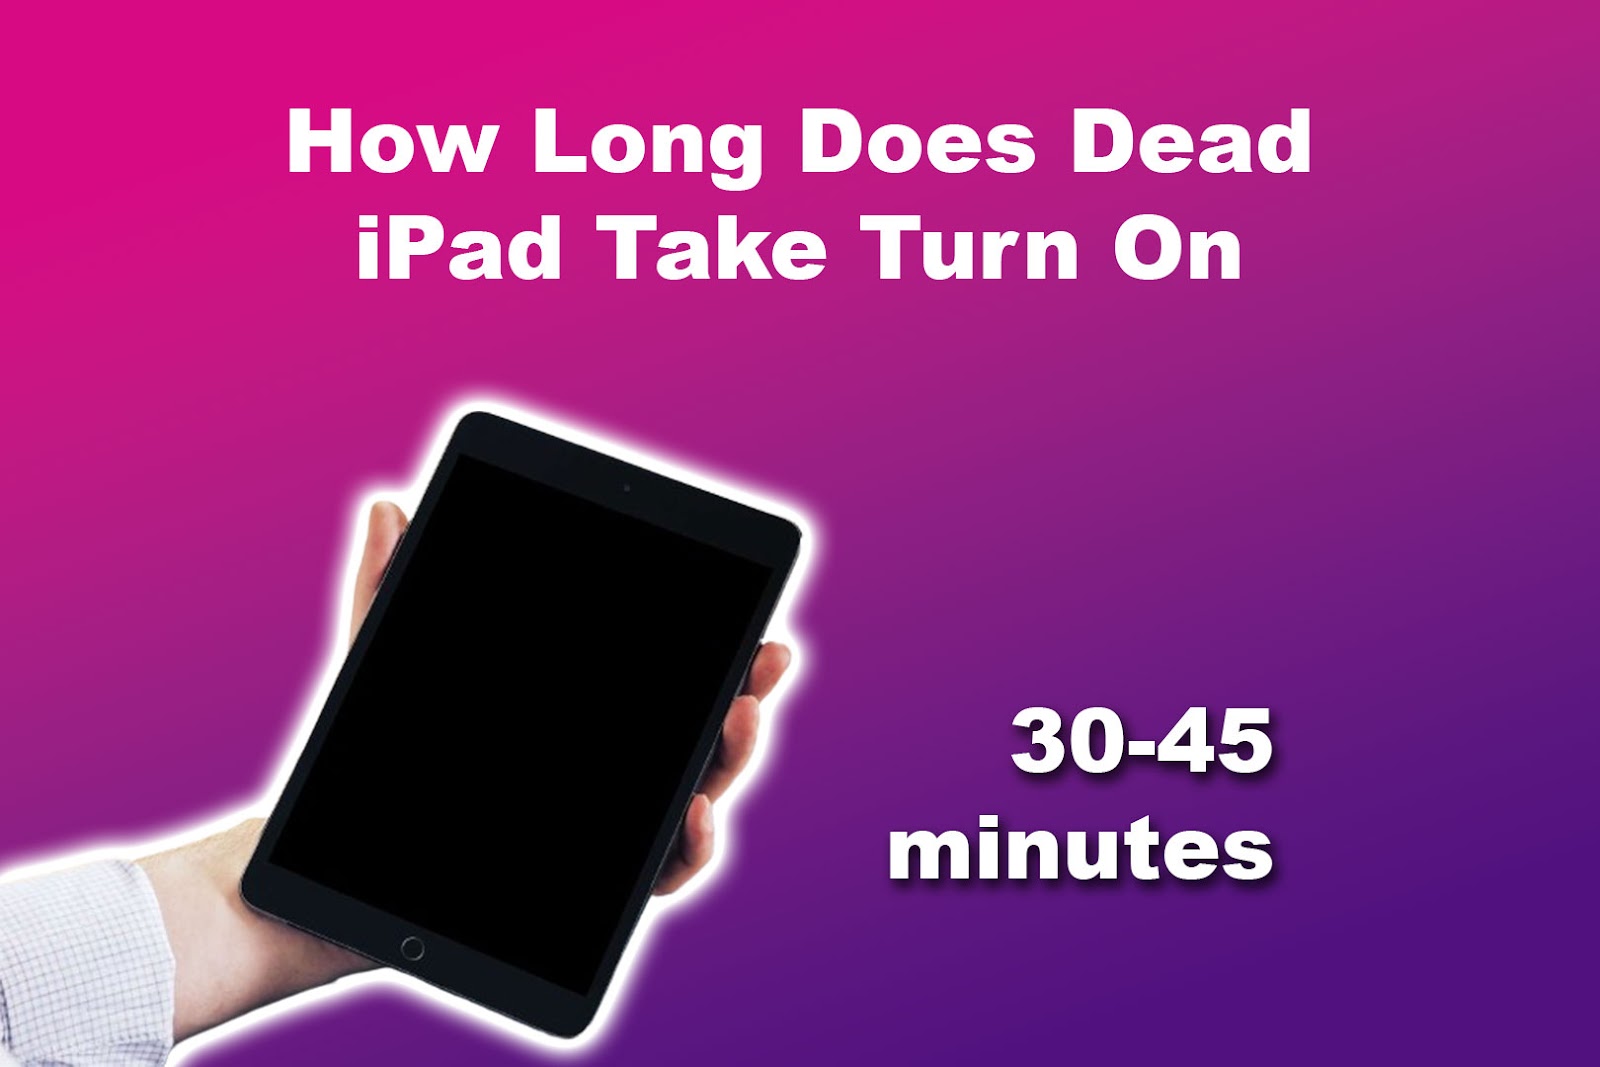 How Long Does Dead iPad Take Turn On